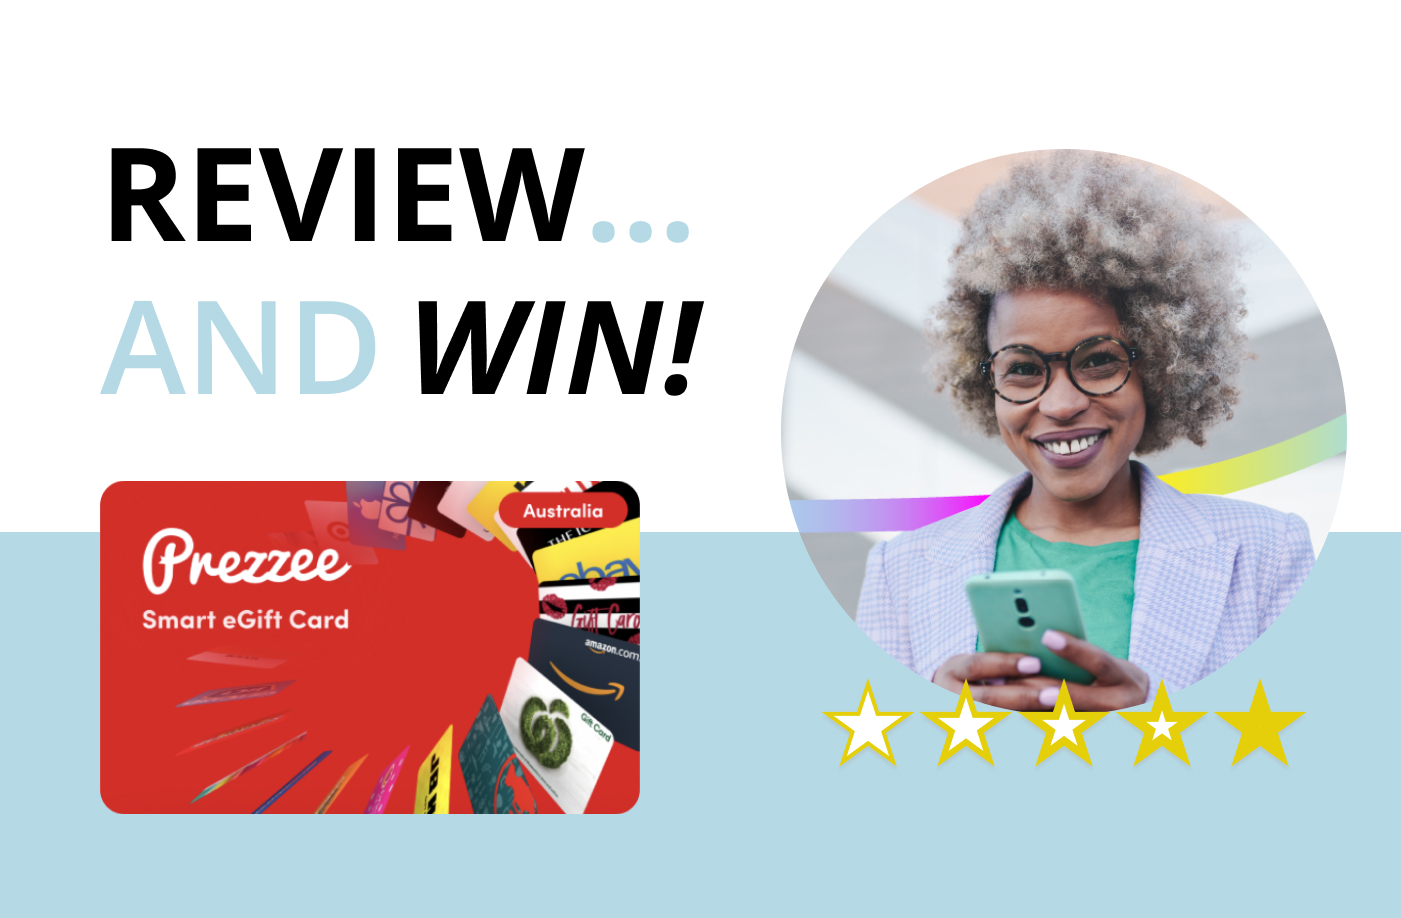 Join our reviews campaign and win a Gift Card!